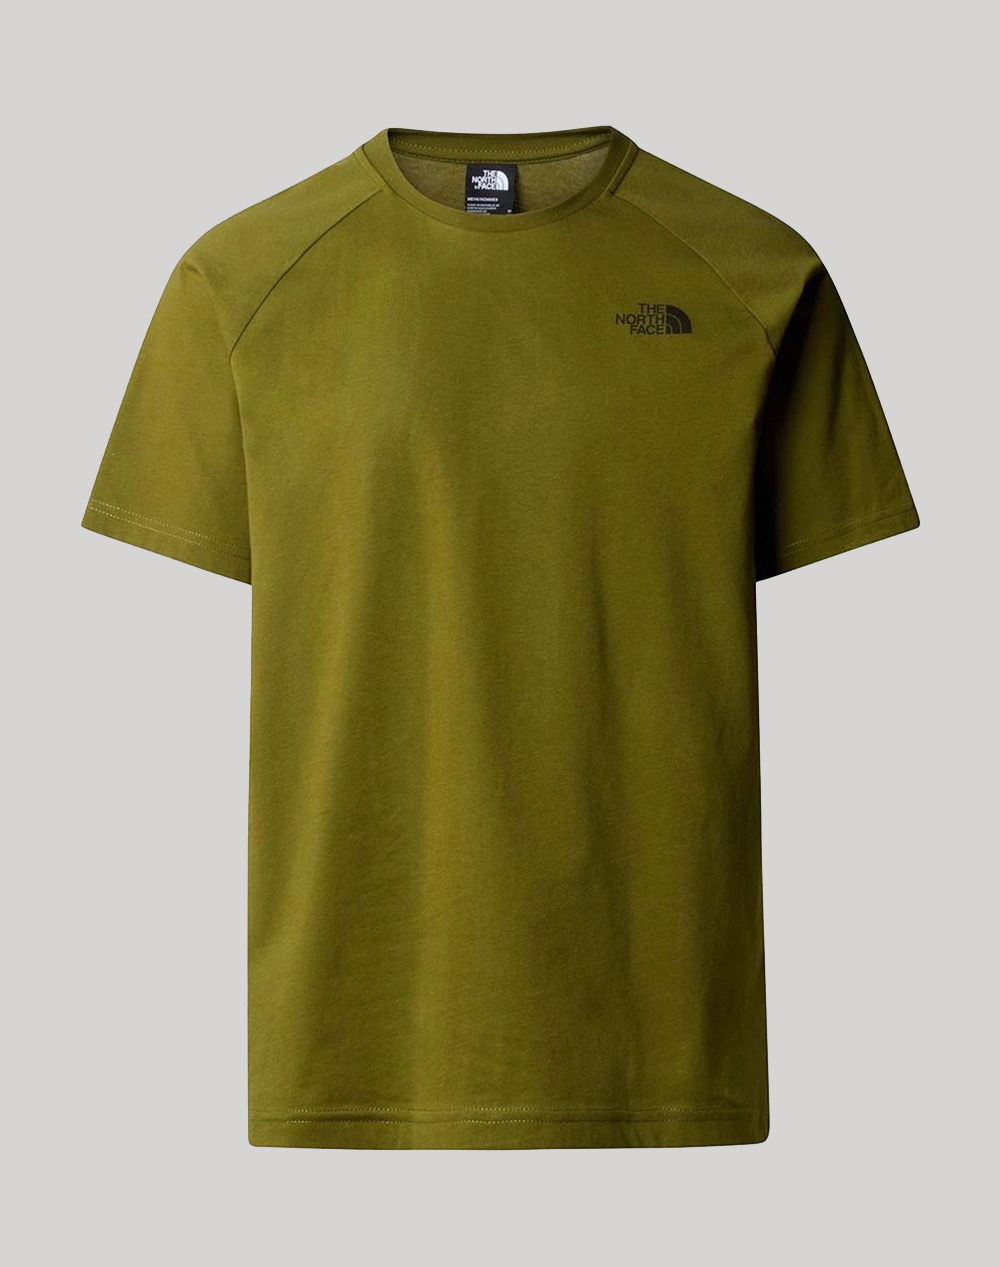 THE NORTH FACE M S/S NORTH FACES TEE NF0A87NU-NFPIB Olive 3820ATNFA3400016_XR28475